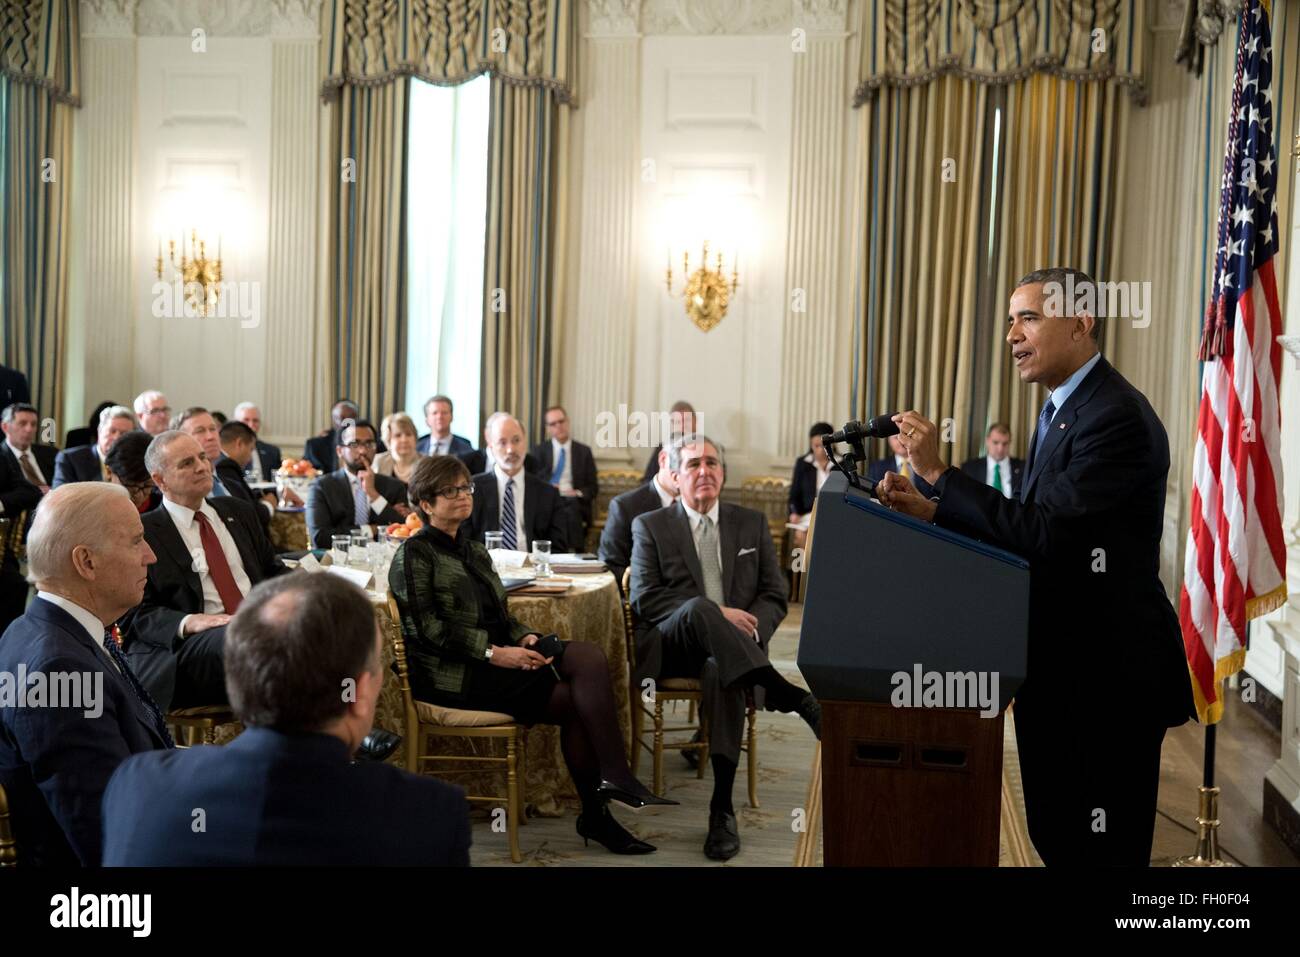 Washington, DC, USA. 22nd Feb, 2016. U.S. President Barack Obama responds to a question while addressing the National Governors Association in the State Dining Room of the White House February 22, 2016 in Washington, DC. Stock Photo